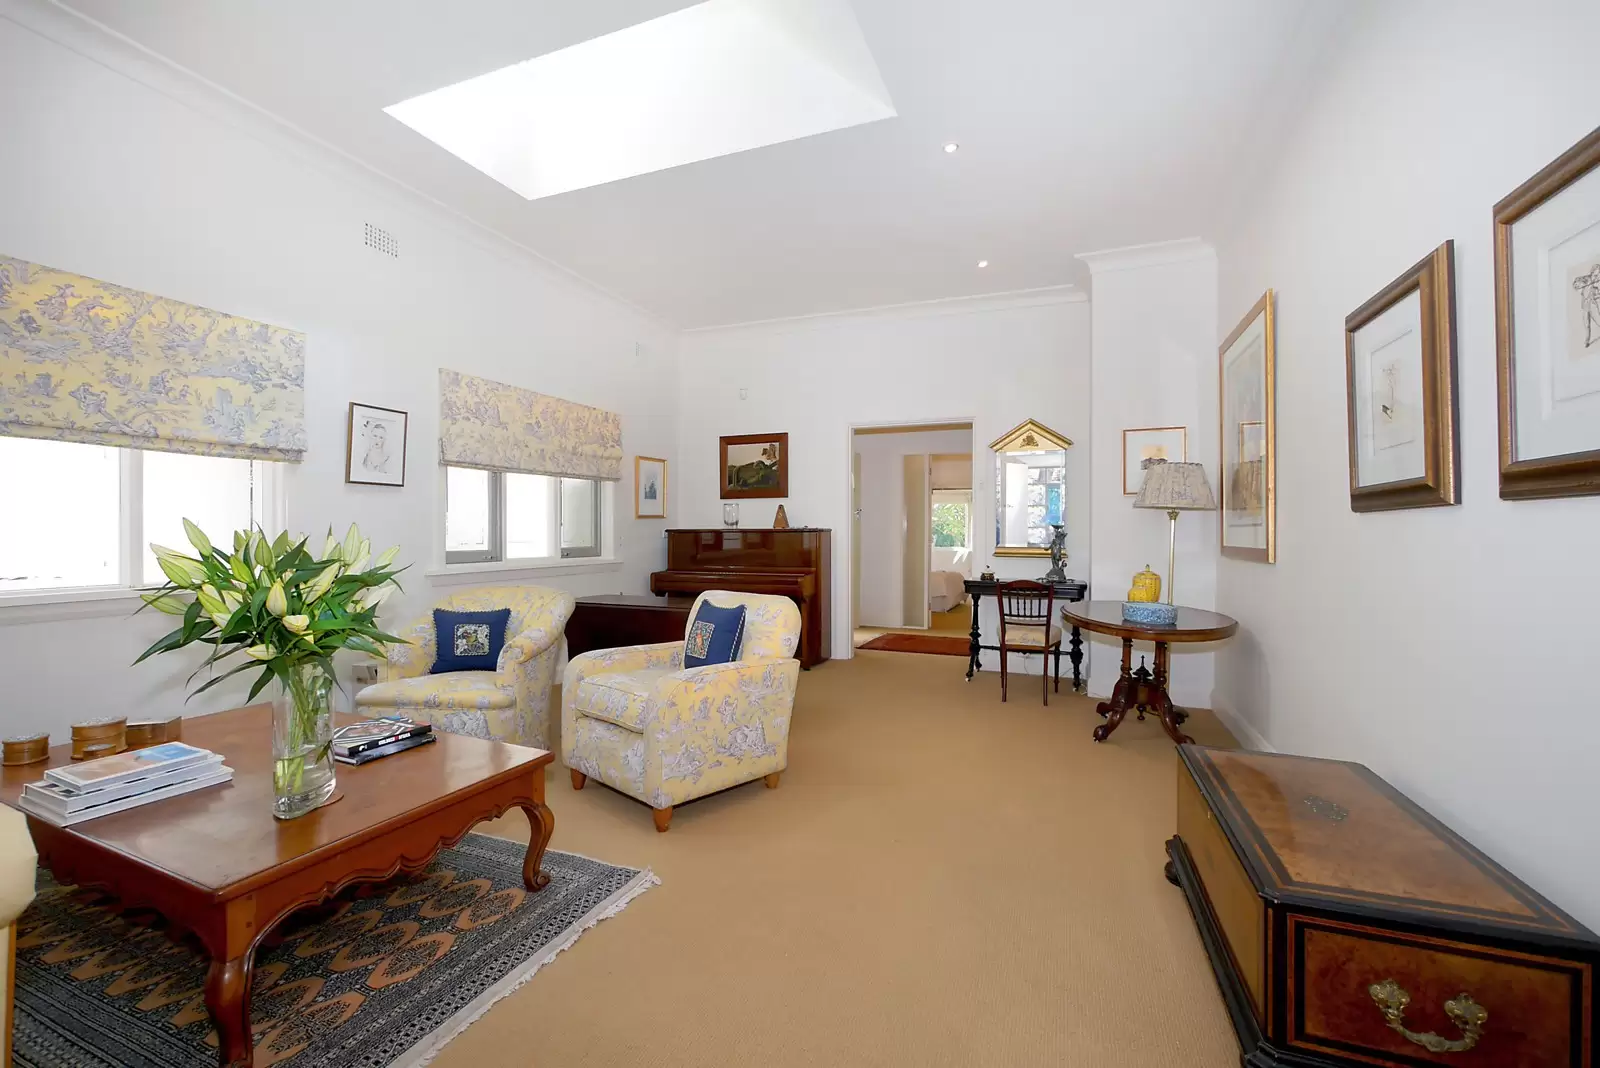 Photo #8: 9 Clarendon Street, Vaucluse - Sold by Sydney Sotheby's International Realty